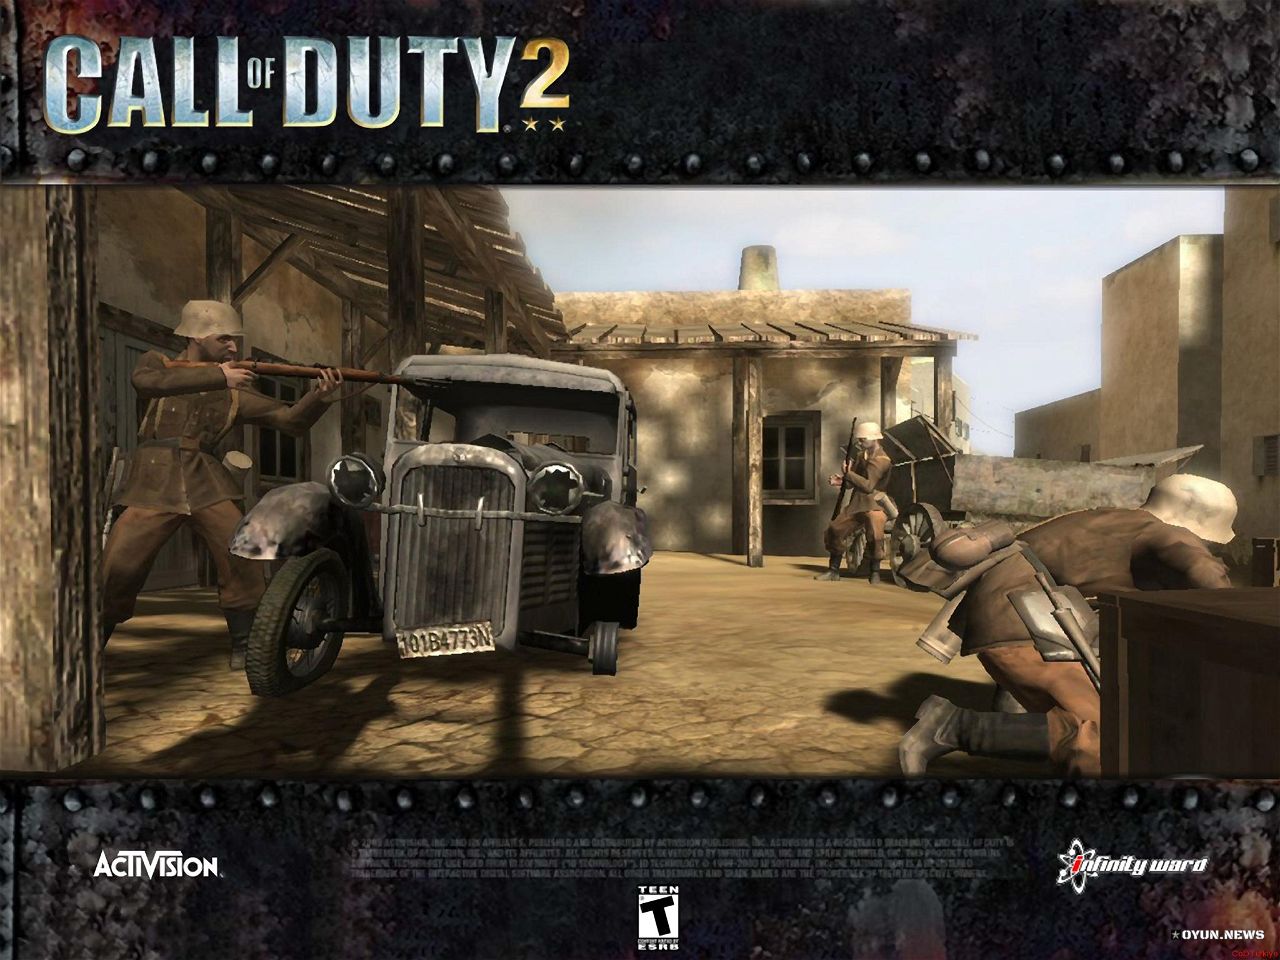 Call Of Duty 2 Wallpaper In Special Frame 15 2048x1536